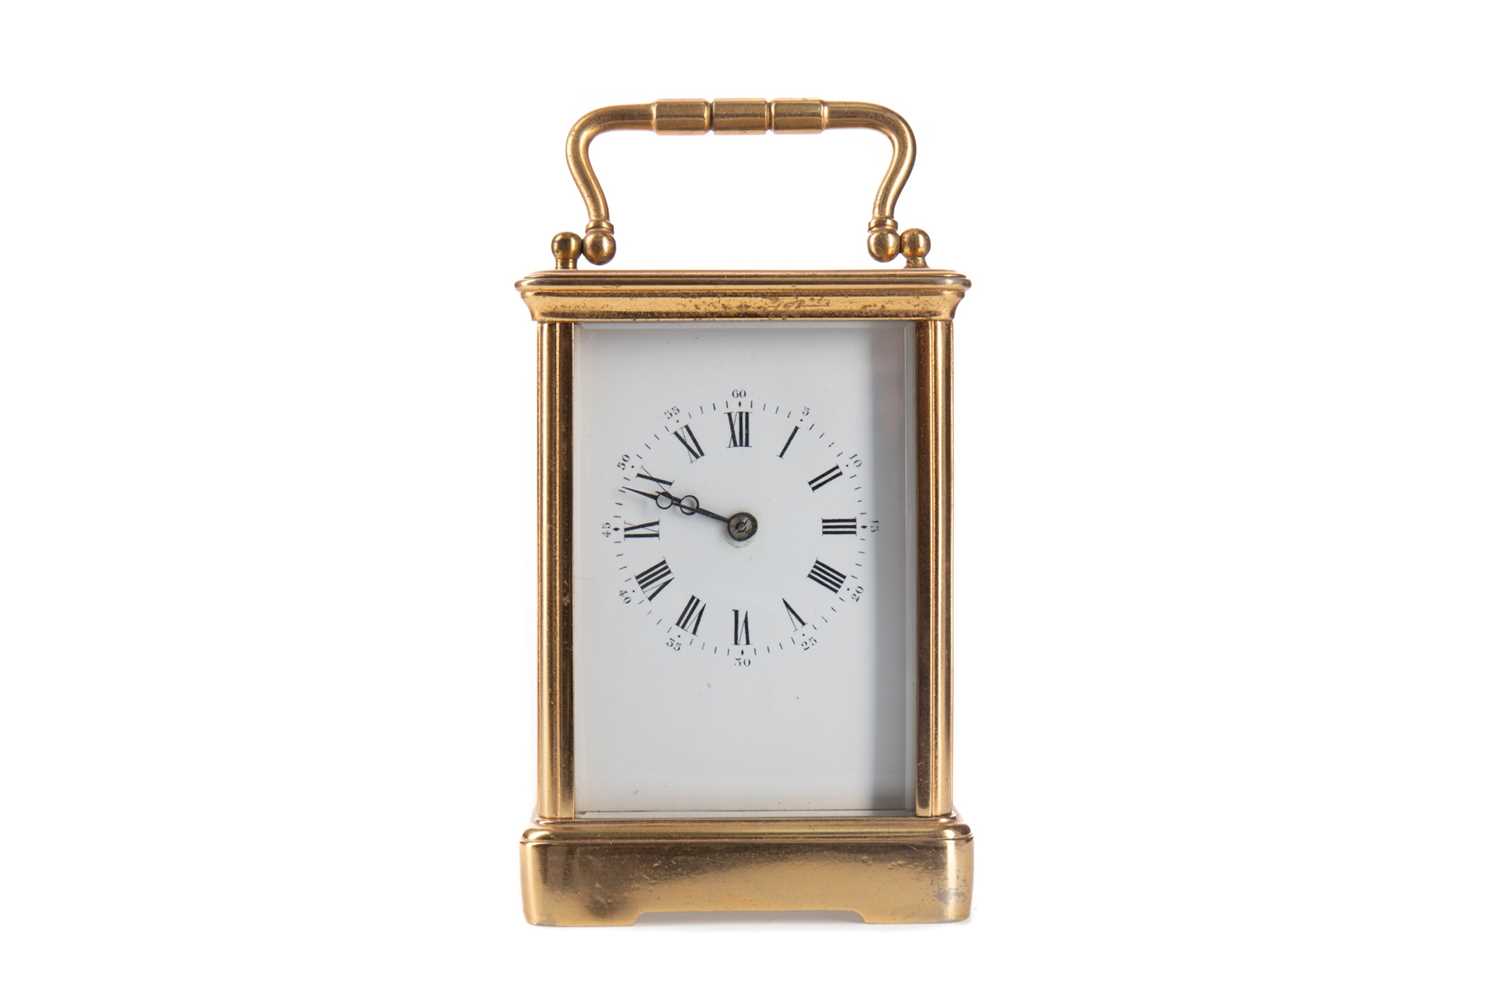 Lot 597 - A LATE 19TH/EARLY 20TH CENTURY BRASS CARRIAGE CLOCK